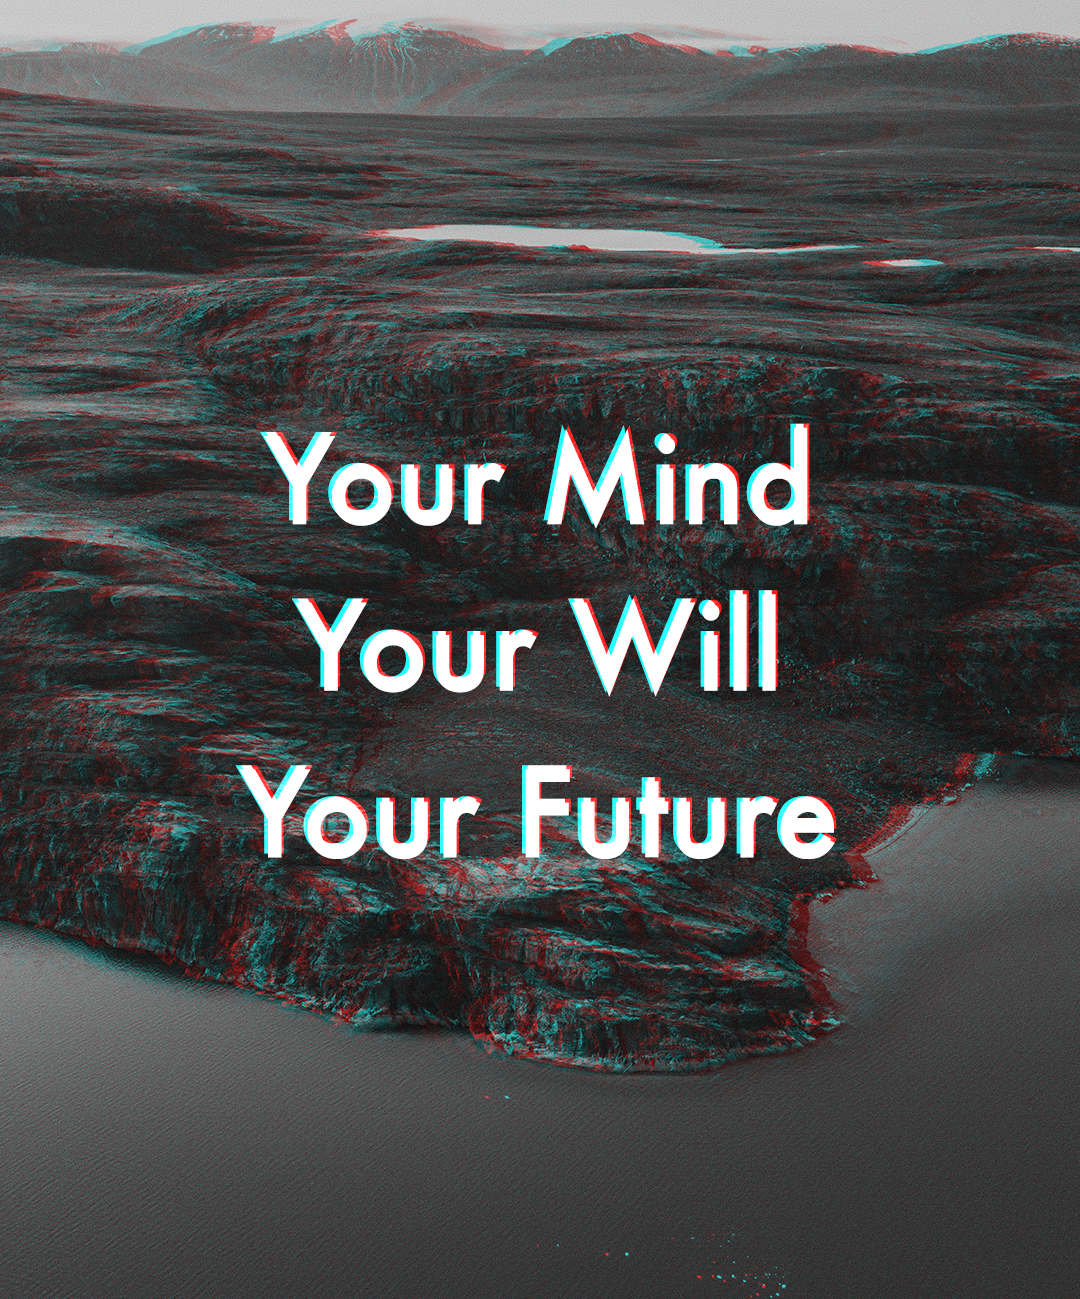 Your Mind, Your Will, Your Future